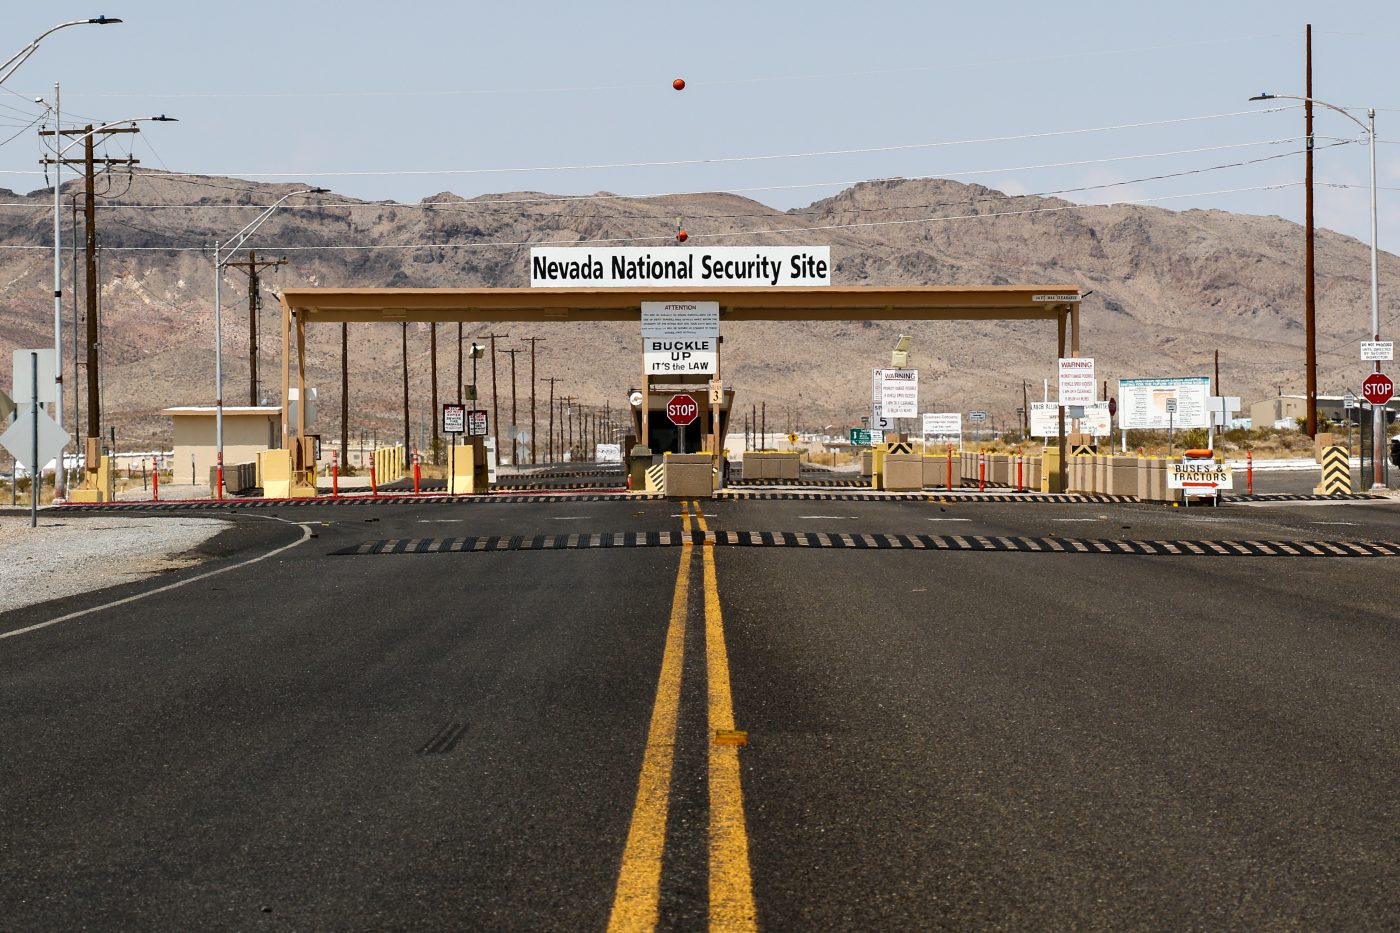 color photo of the front gate at the Nevada National Security Site